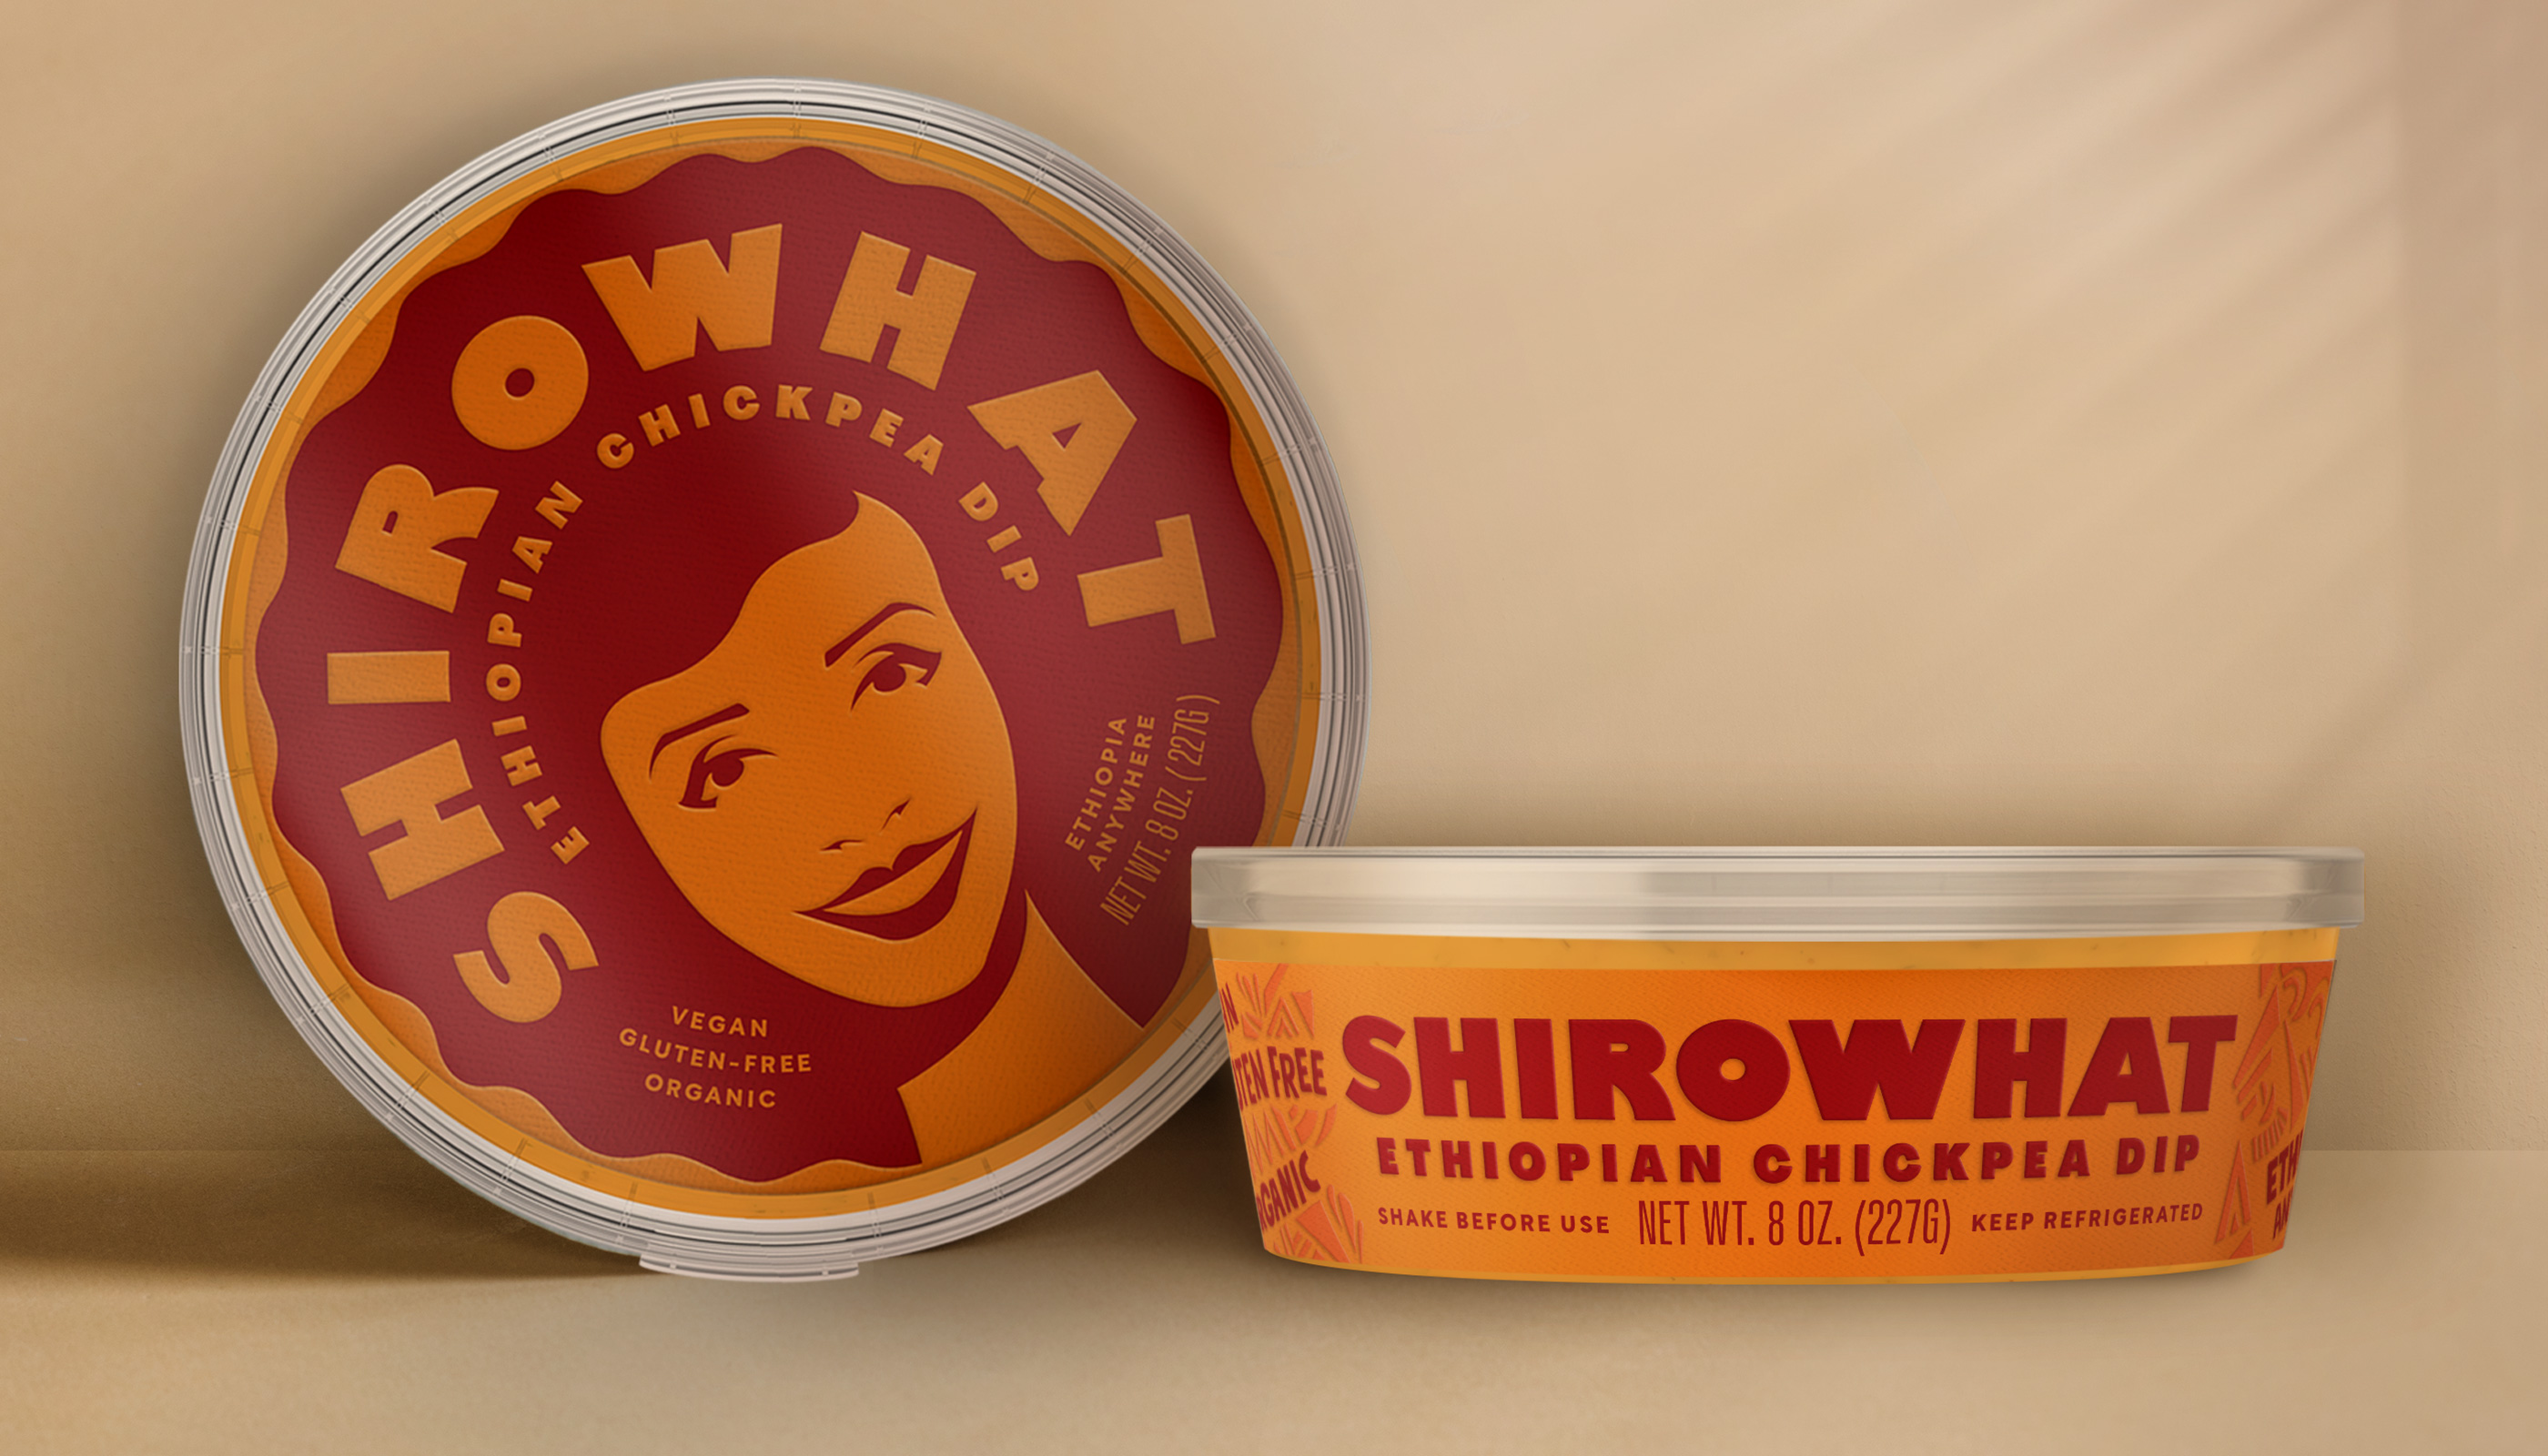 Shirowhat Branding And Packaging Design